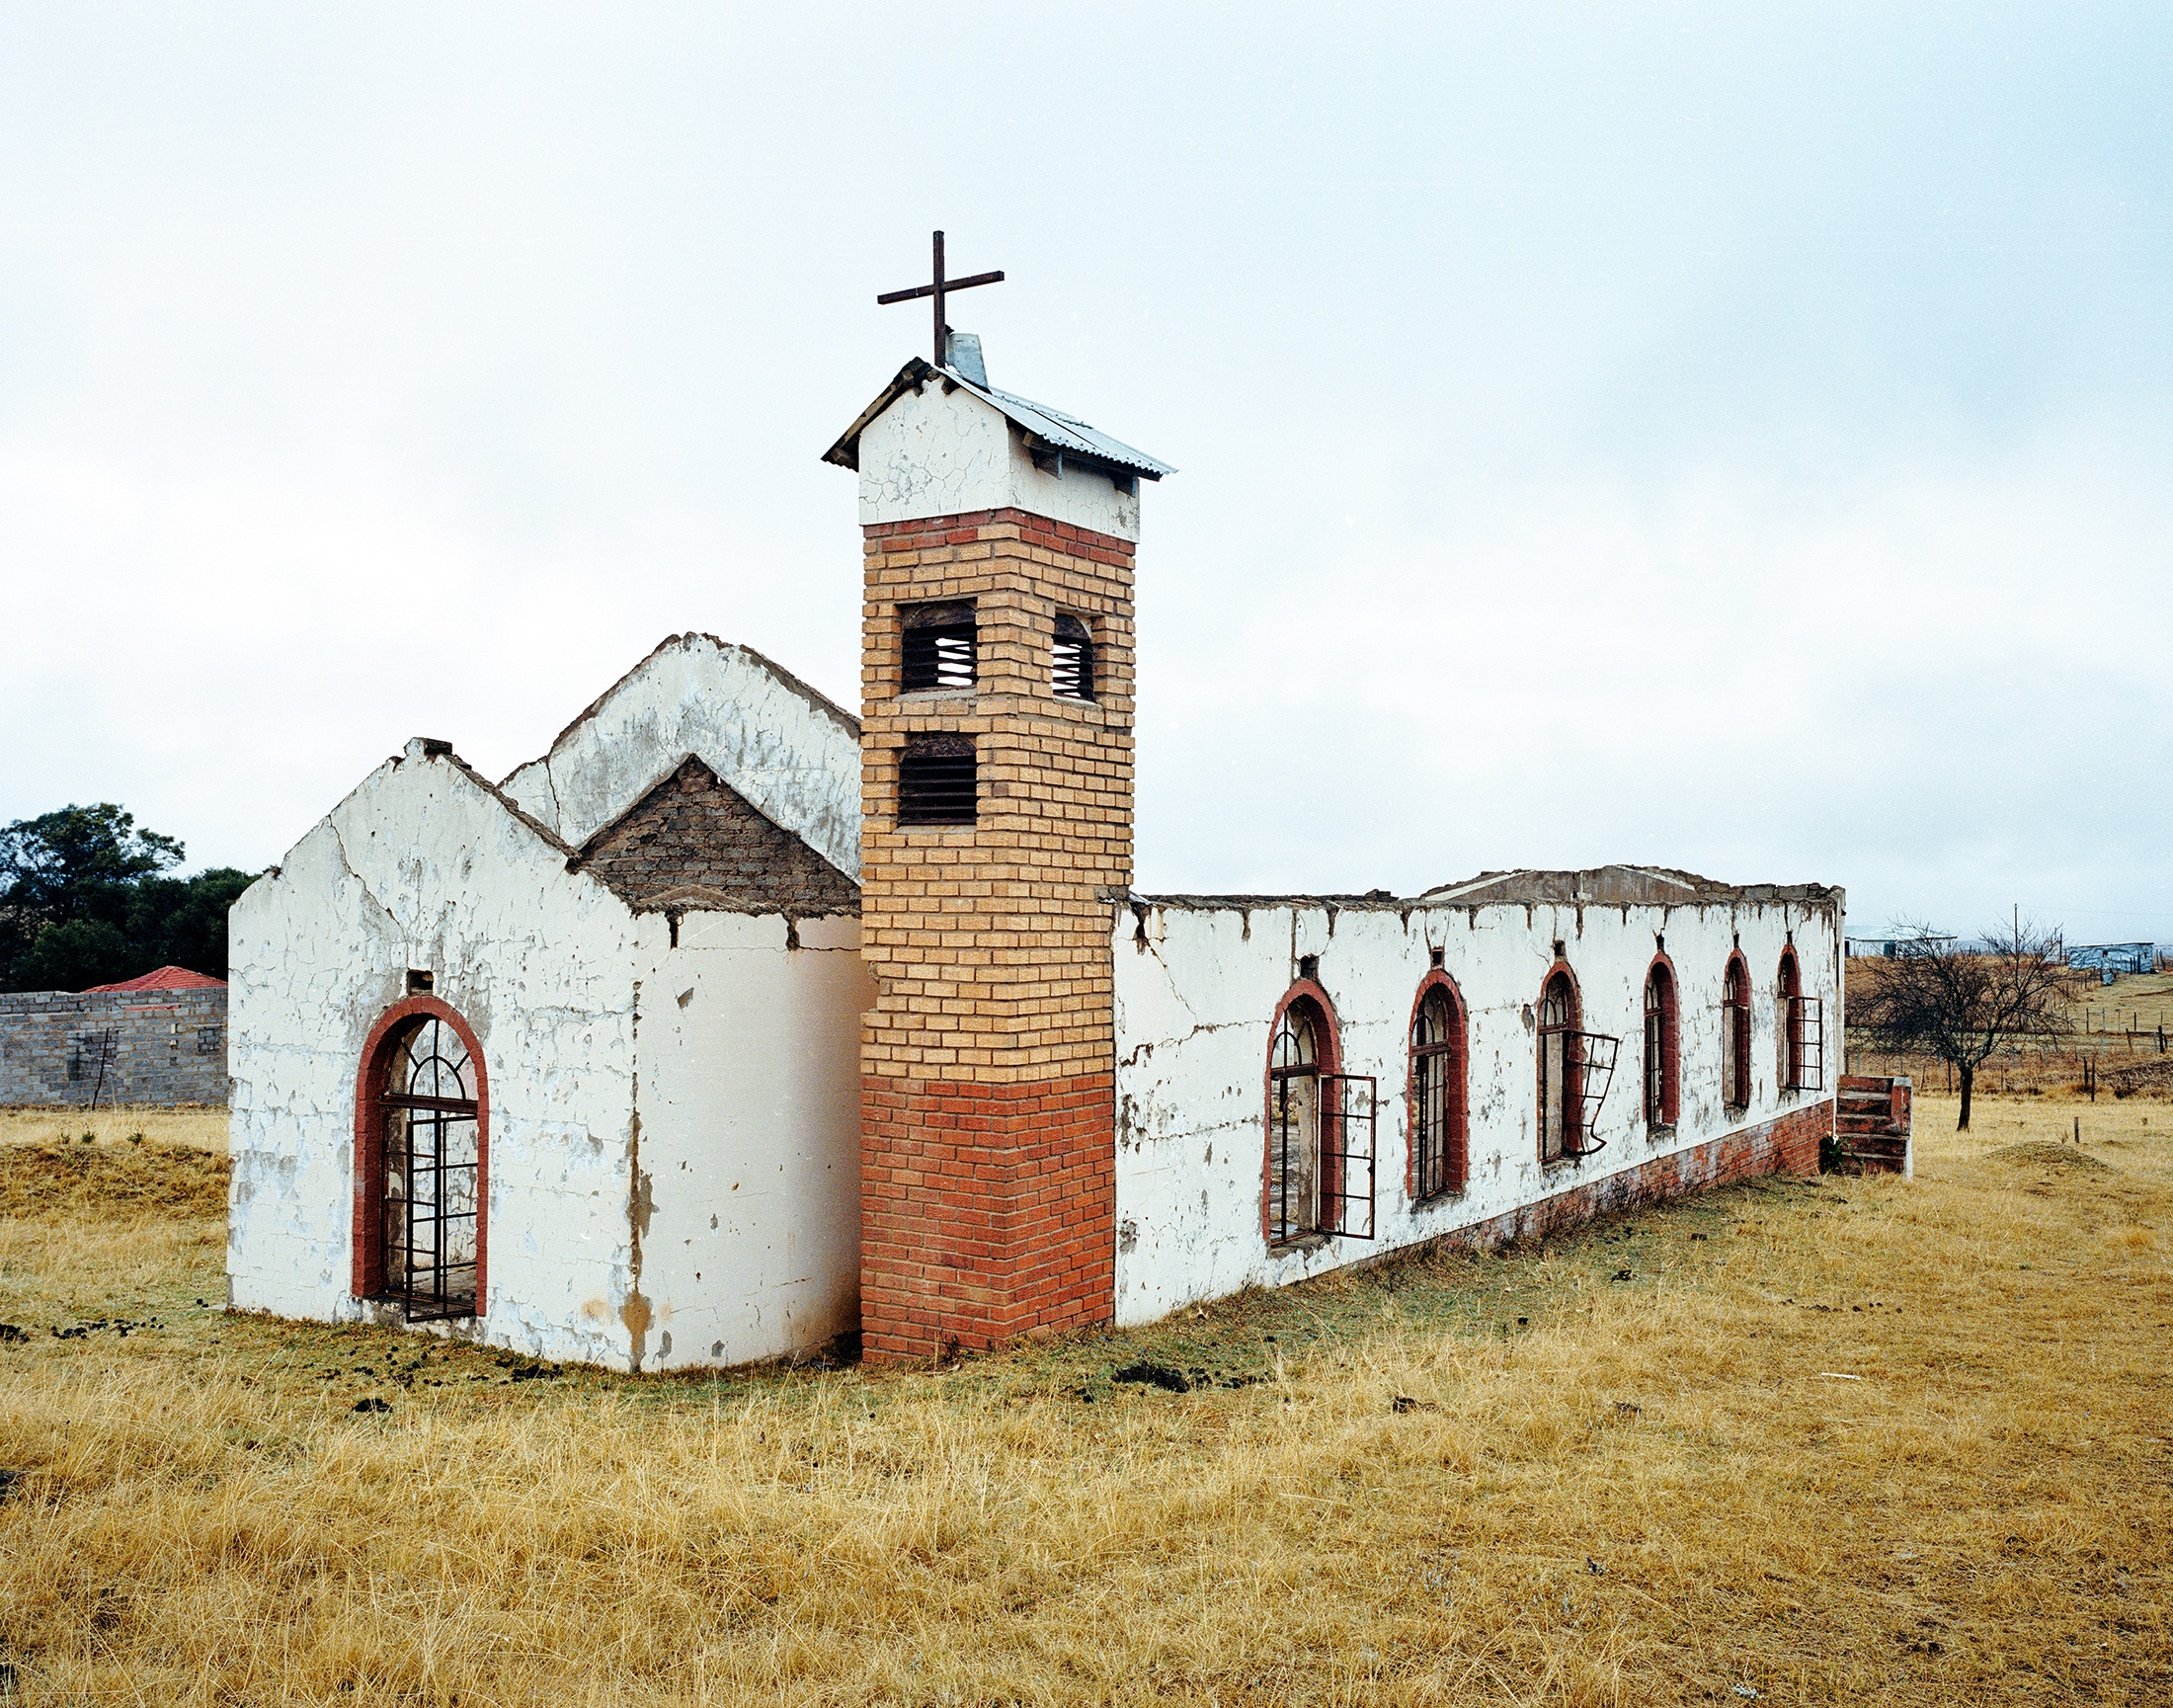 Lindokuhle Sobekwa's photograph 'eDonkey Church' shows a dilapidated church surrounded by grass.
